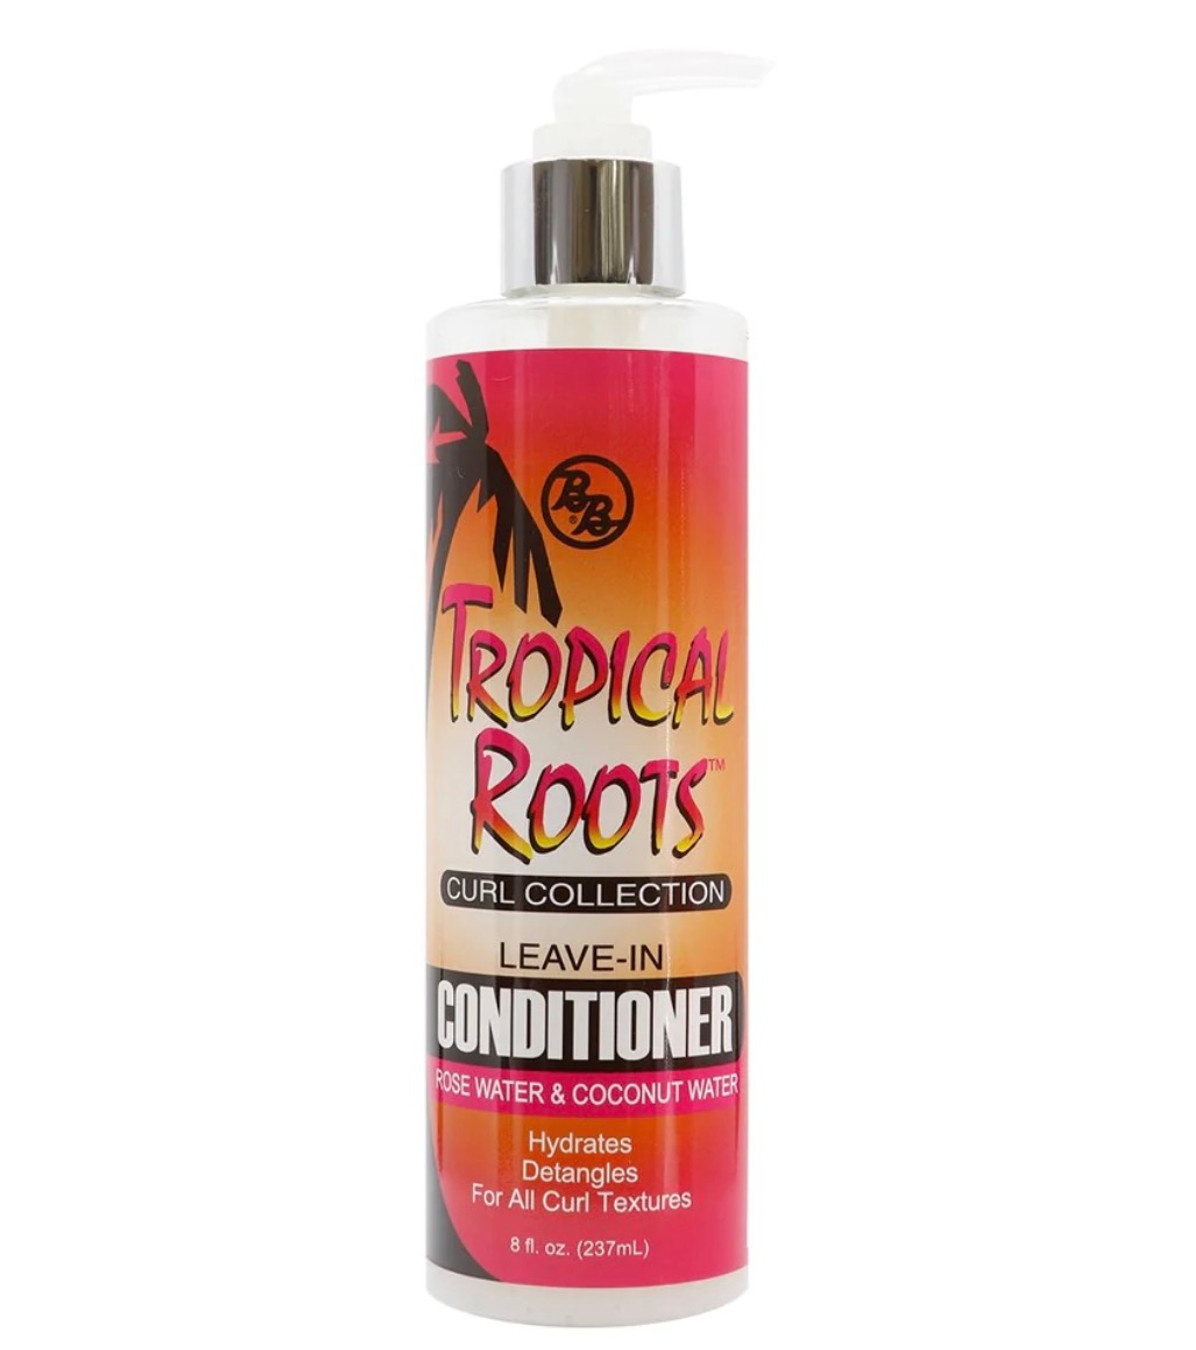 BRONNER BROS Tropical Roots Curl Collection Leave-in Conditioner (8 oz)